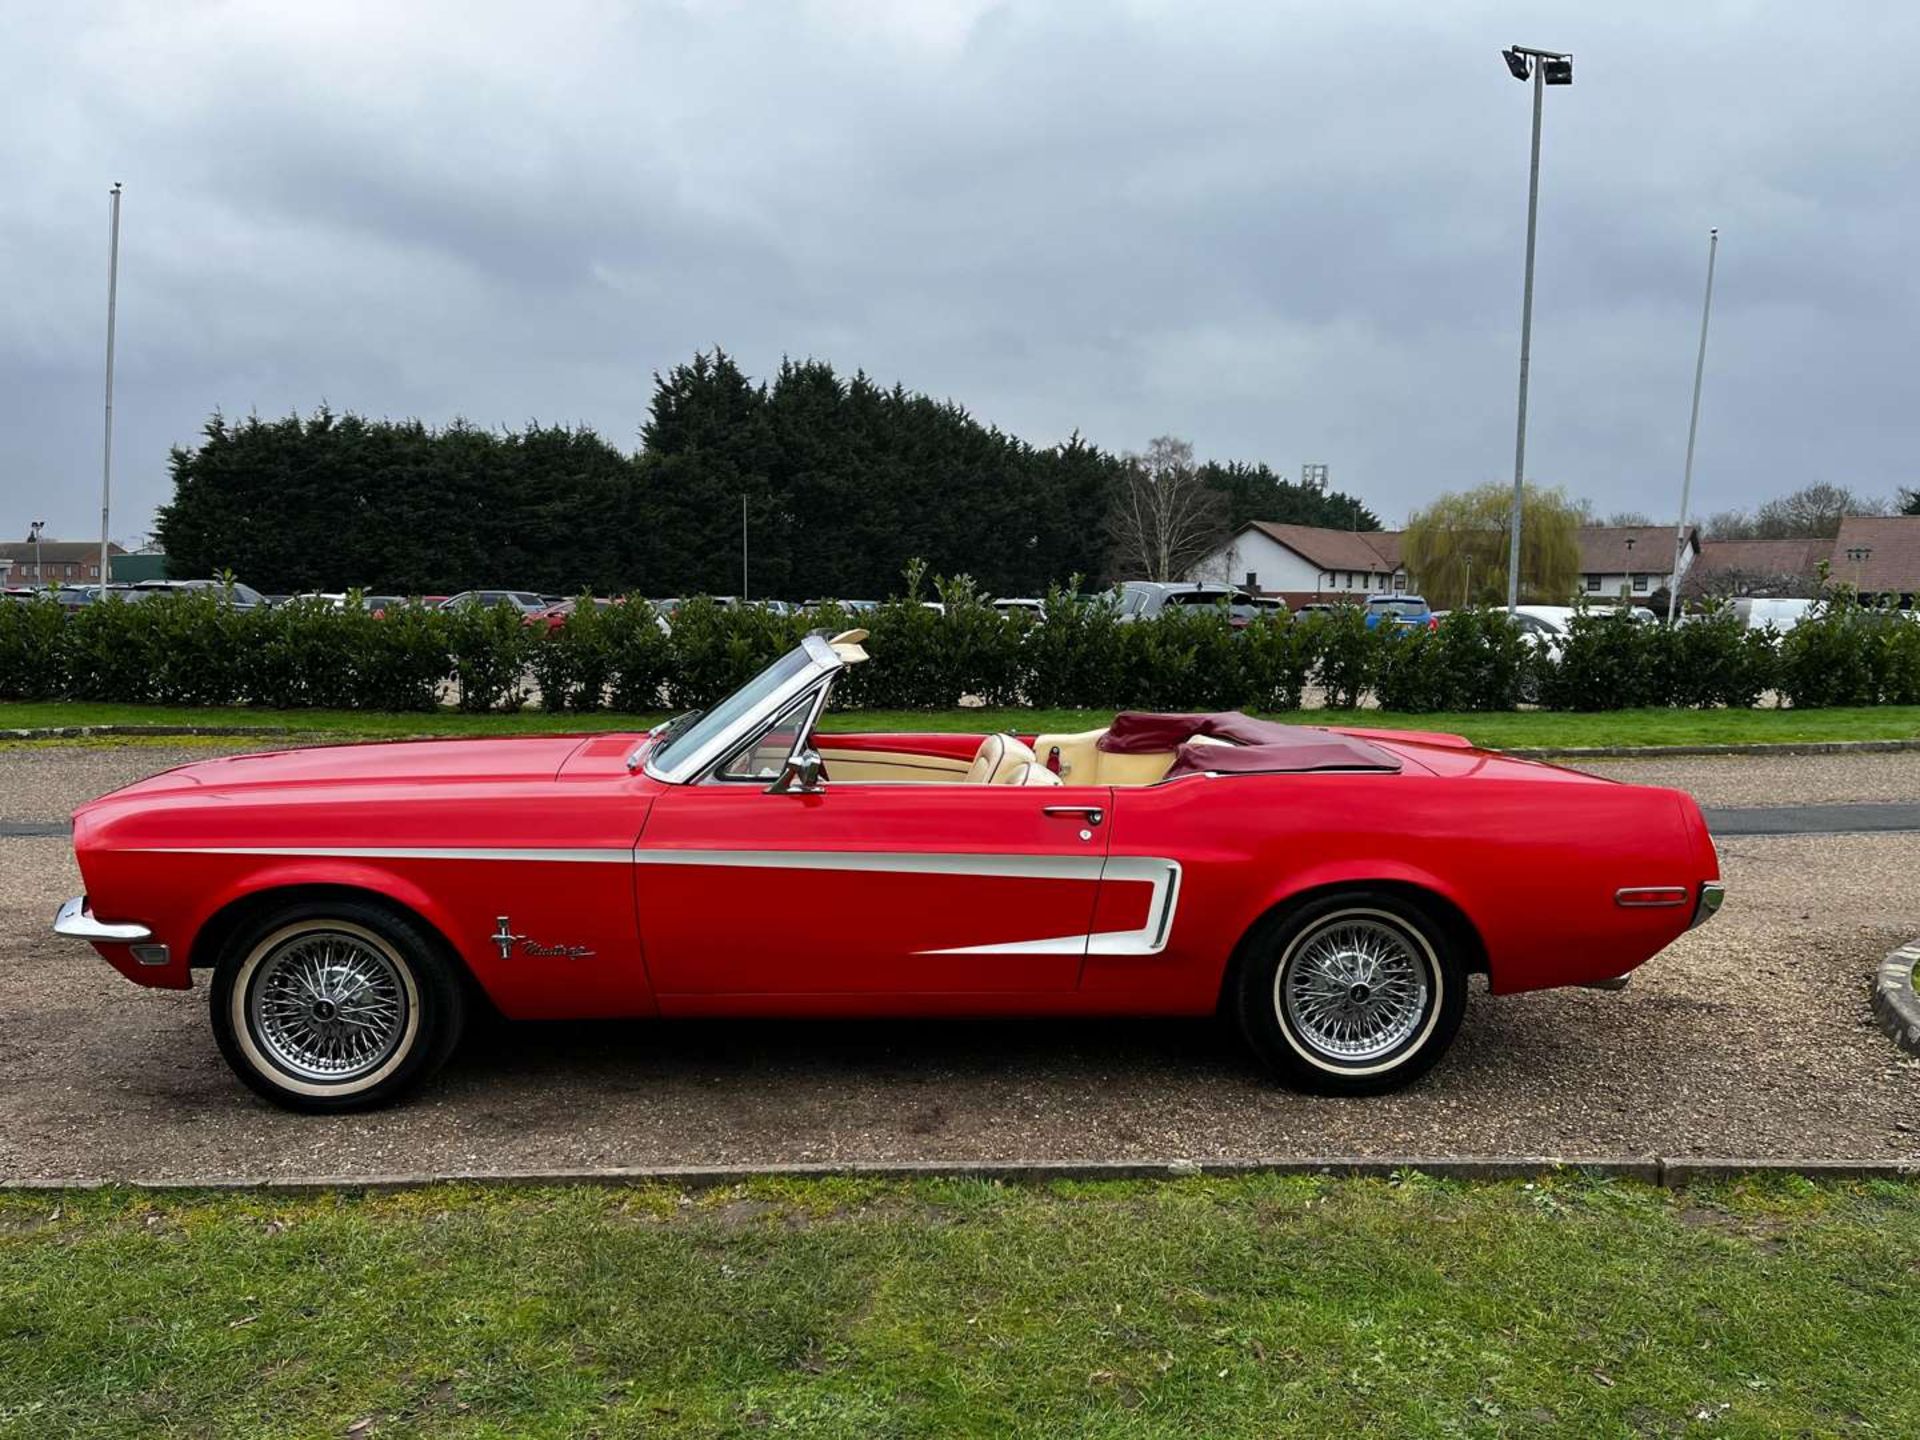 1968 FORD MUSTANG 4.7 V8 AUTO CONVERTIBLE LHD - Image 5 of 30